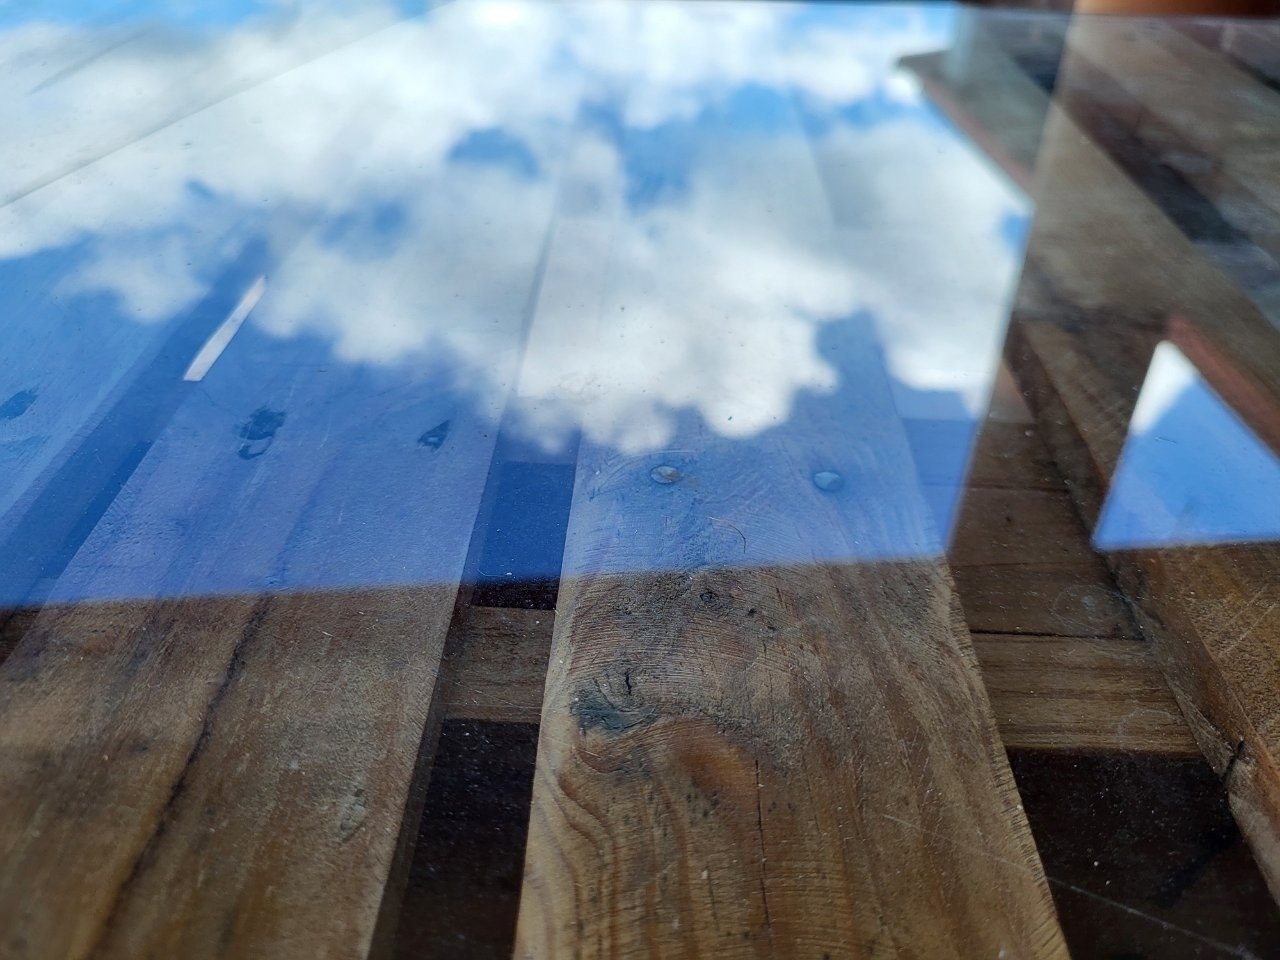 Clouds reflection on glass table 